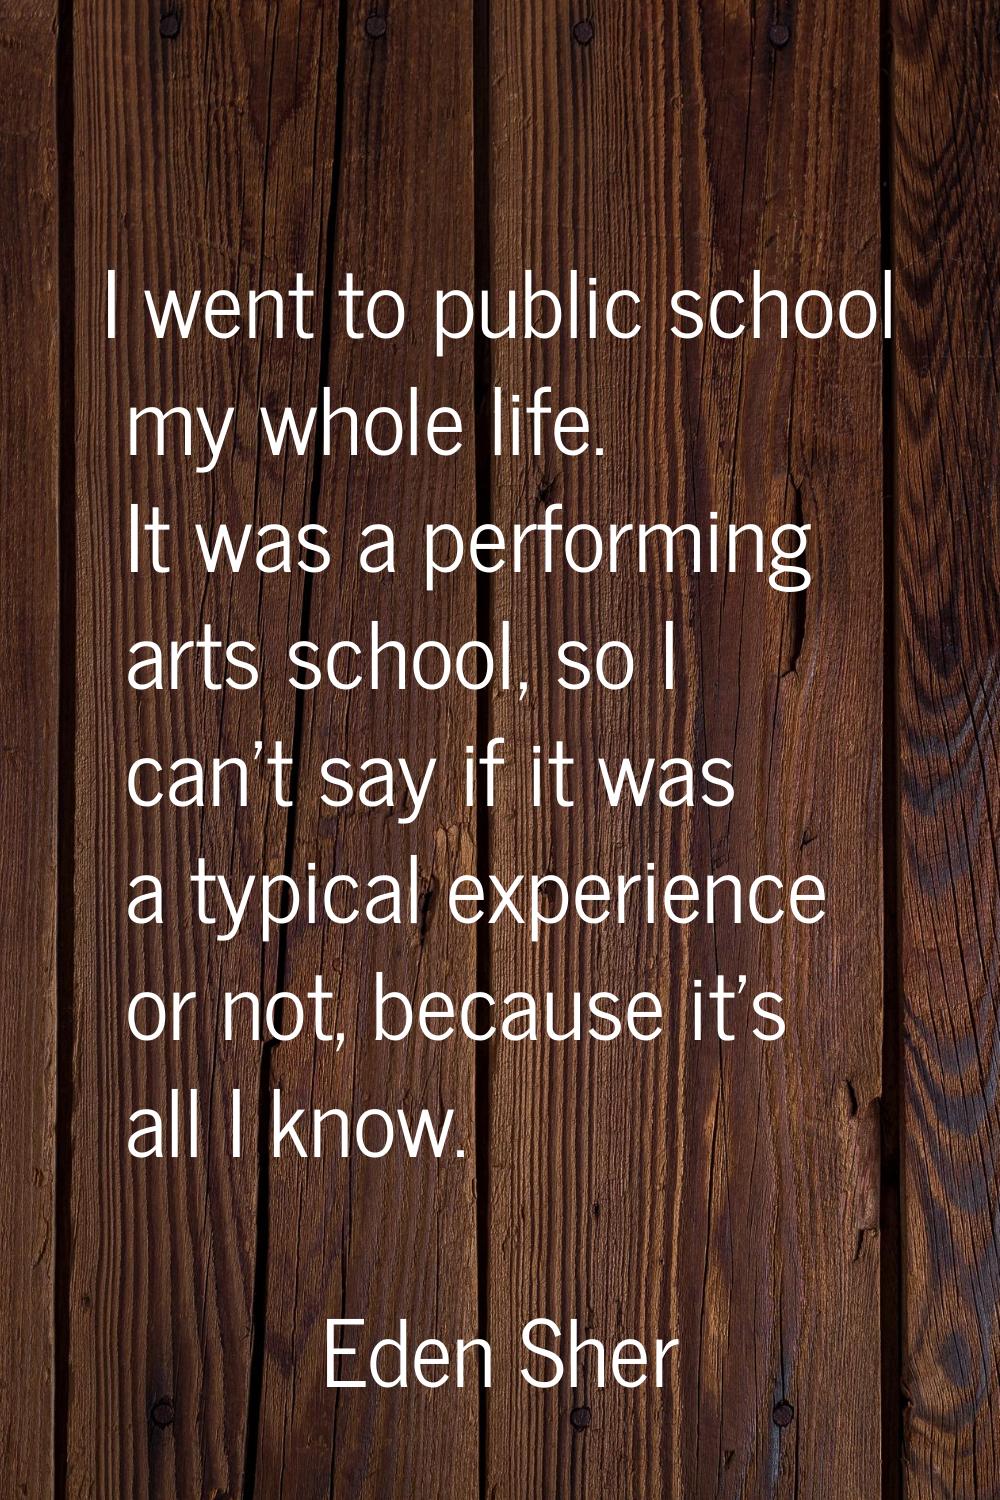 I went to public school my whole life. It was a performing arts school, so I can't say if it was a 